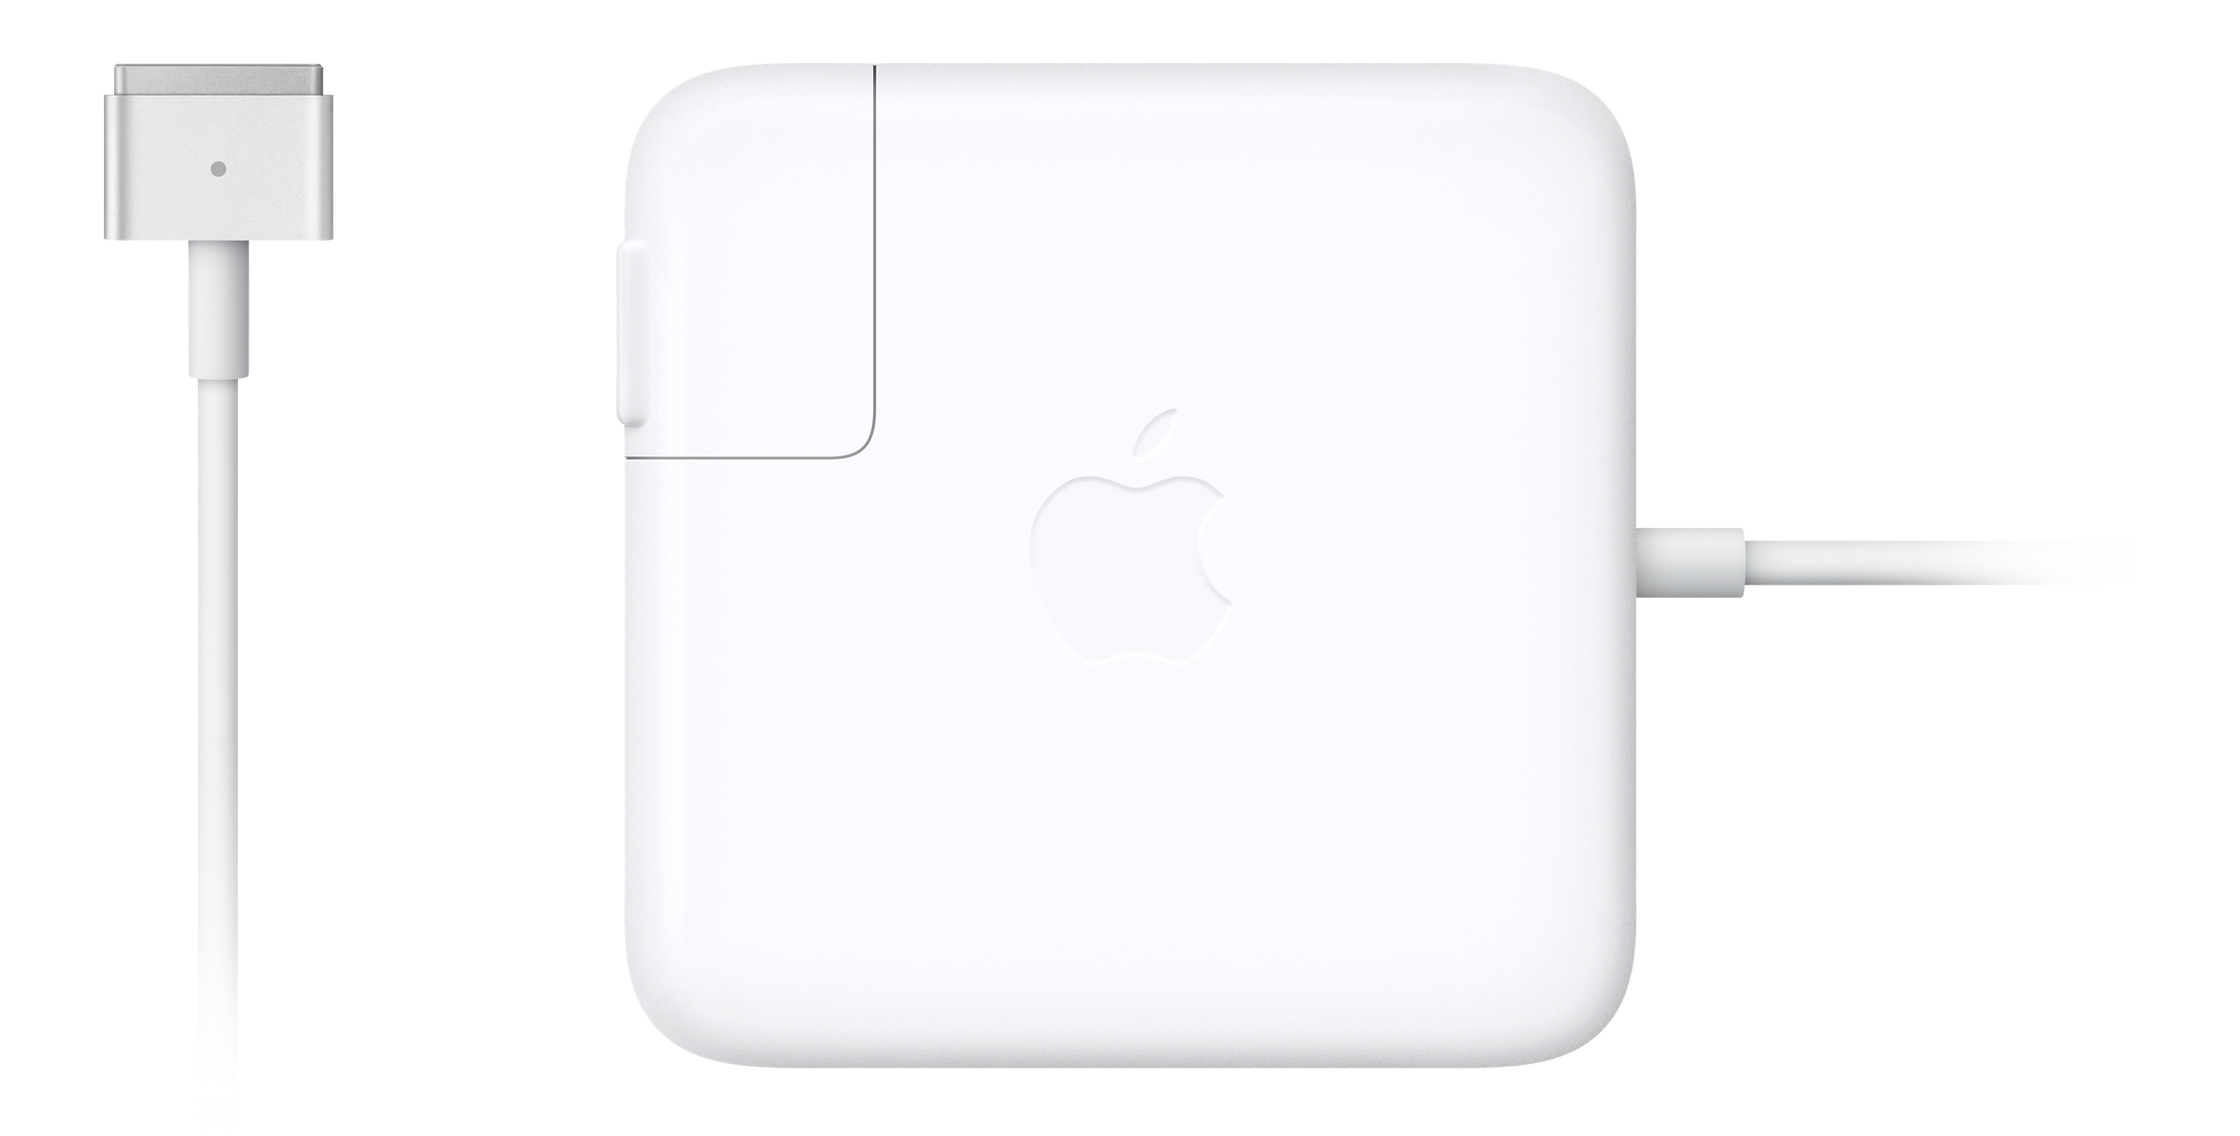 Apple 85W Magsafe 2 Power Adapter Charger - Macbook, Macbook Pro - Micro  Center